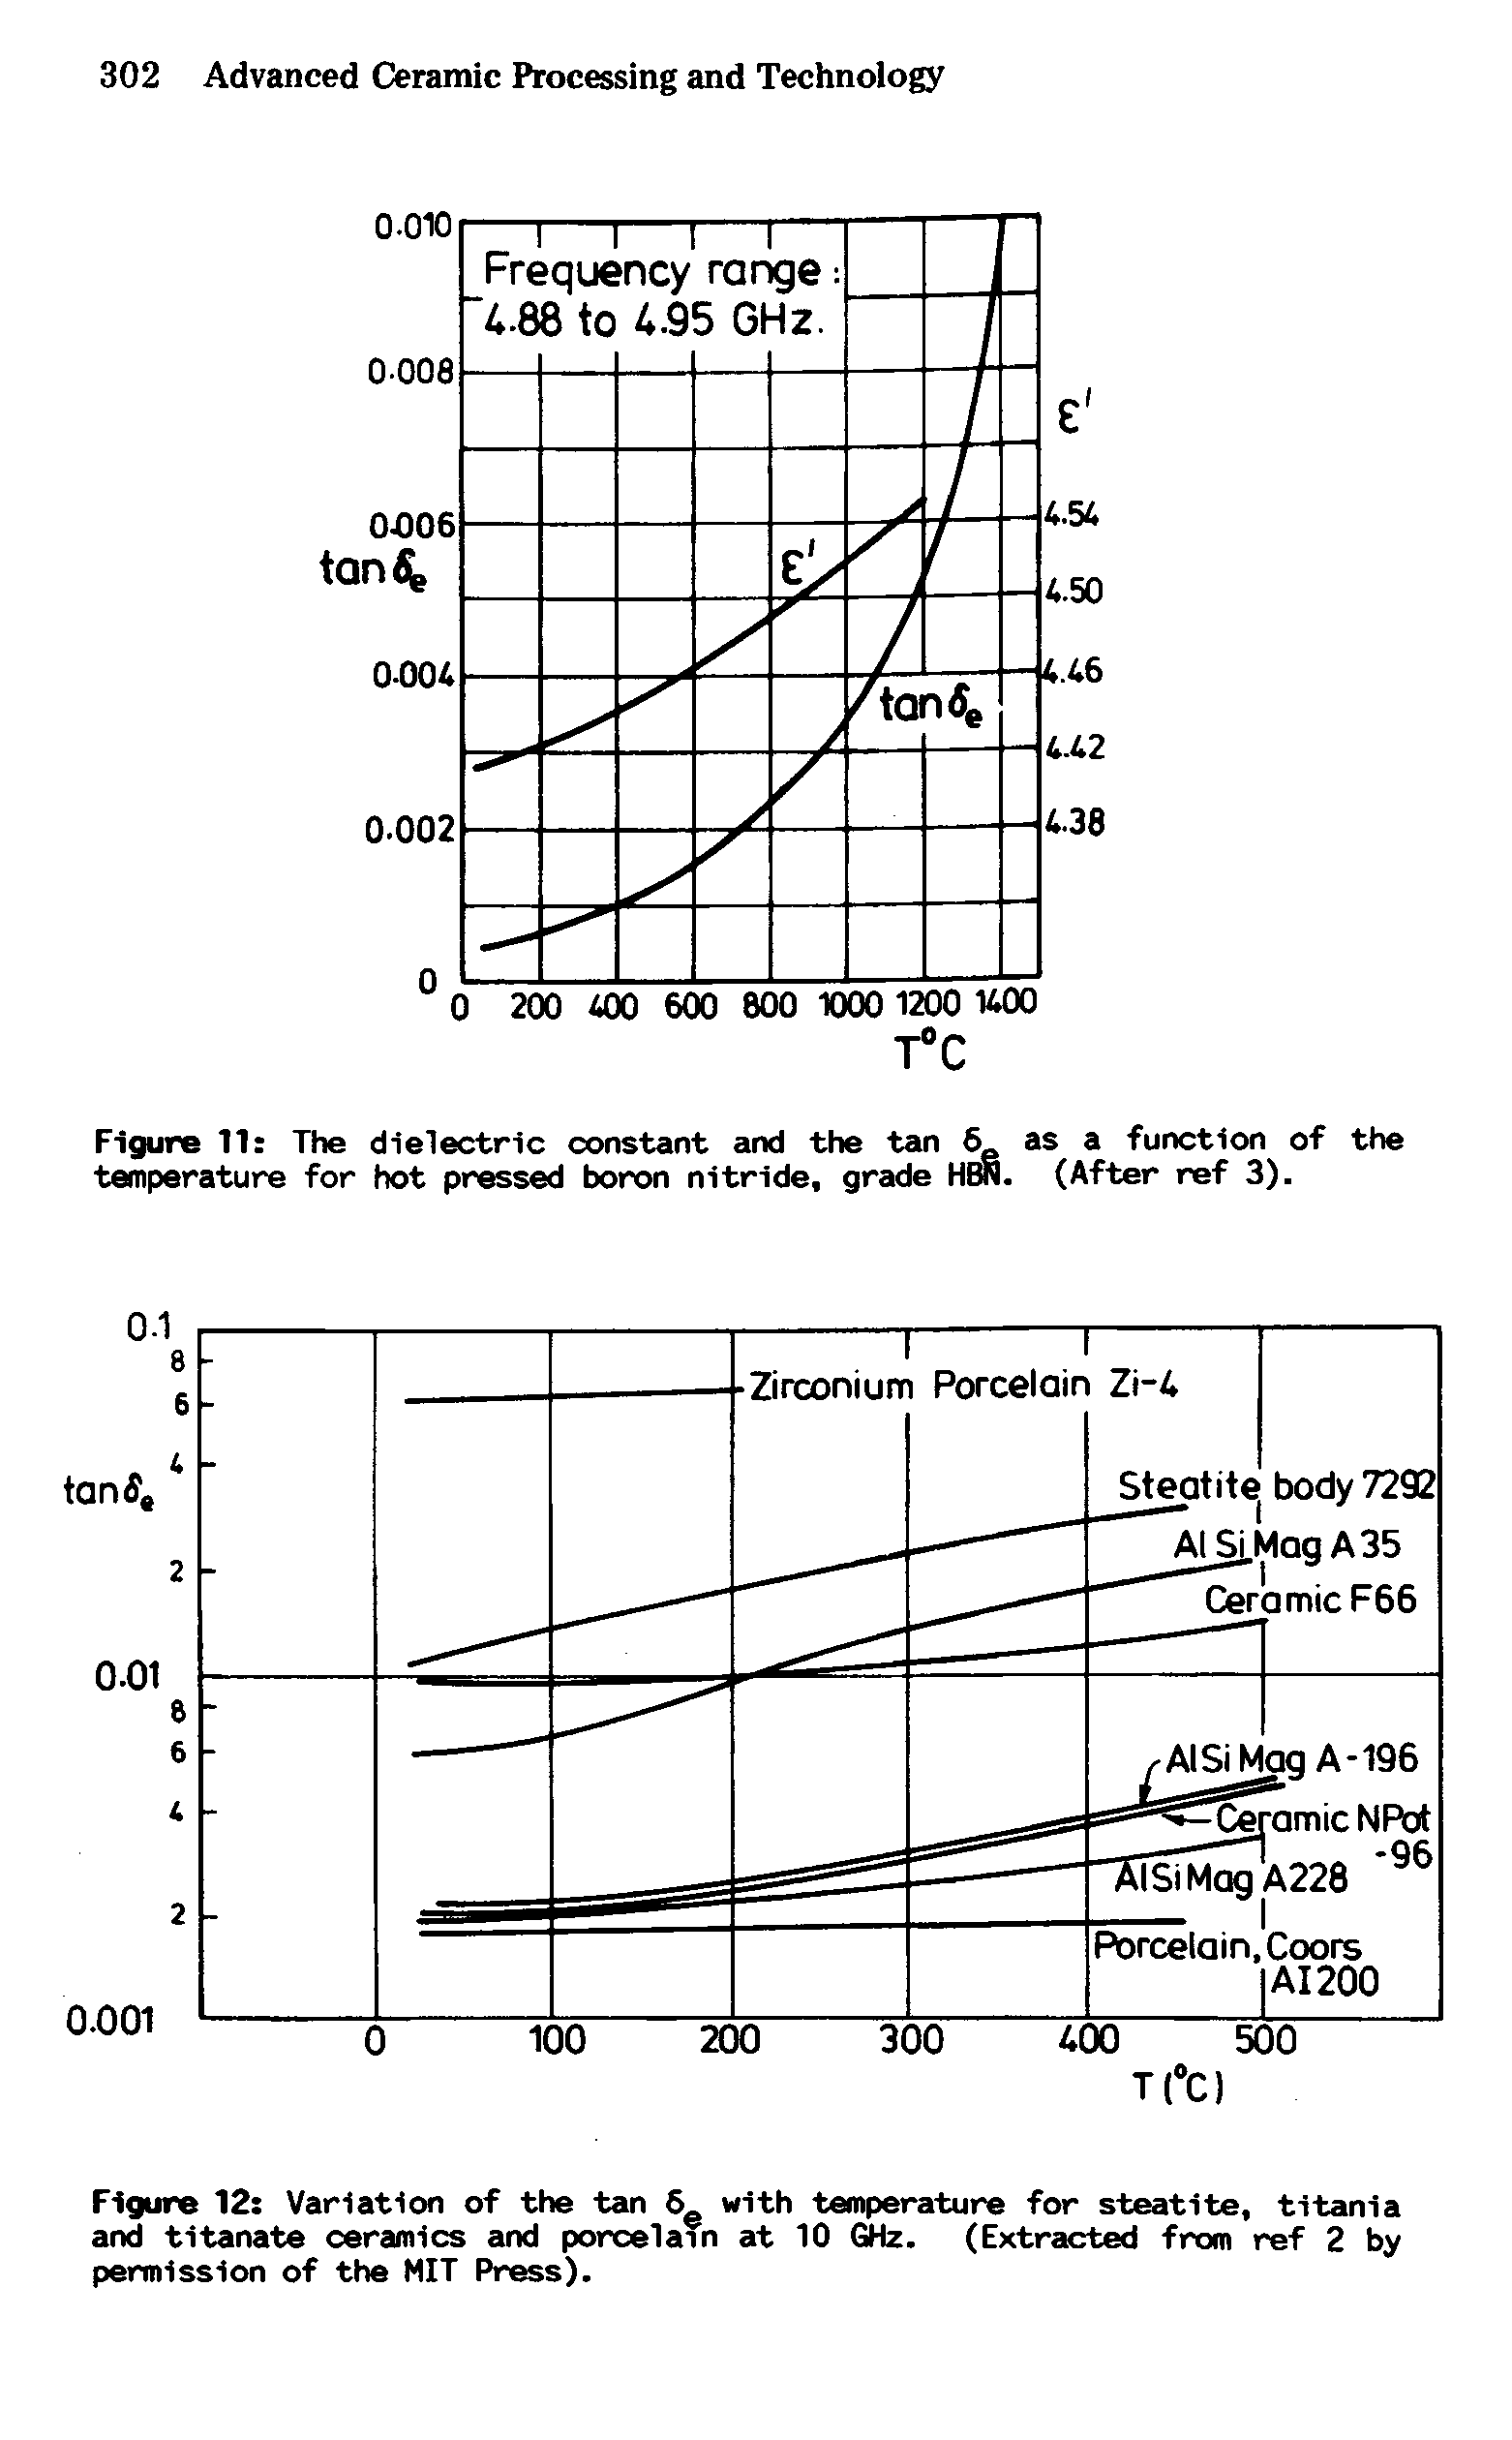 Figure 12 Variation of the tan 6 with temperature for steatite, titania and titanate ceramics and porcelain at 10 GHz. (Extracted from ref 2 by permission of the MIT Press).